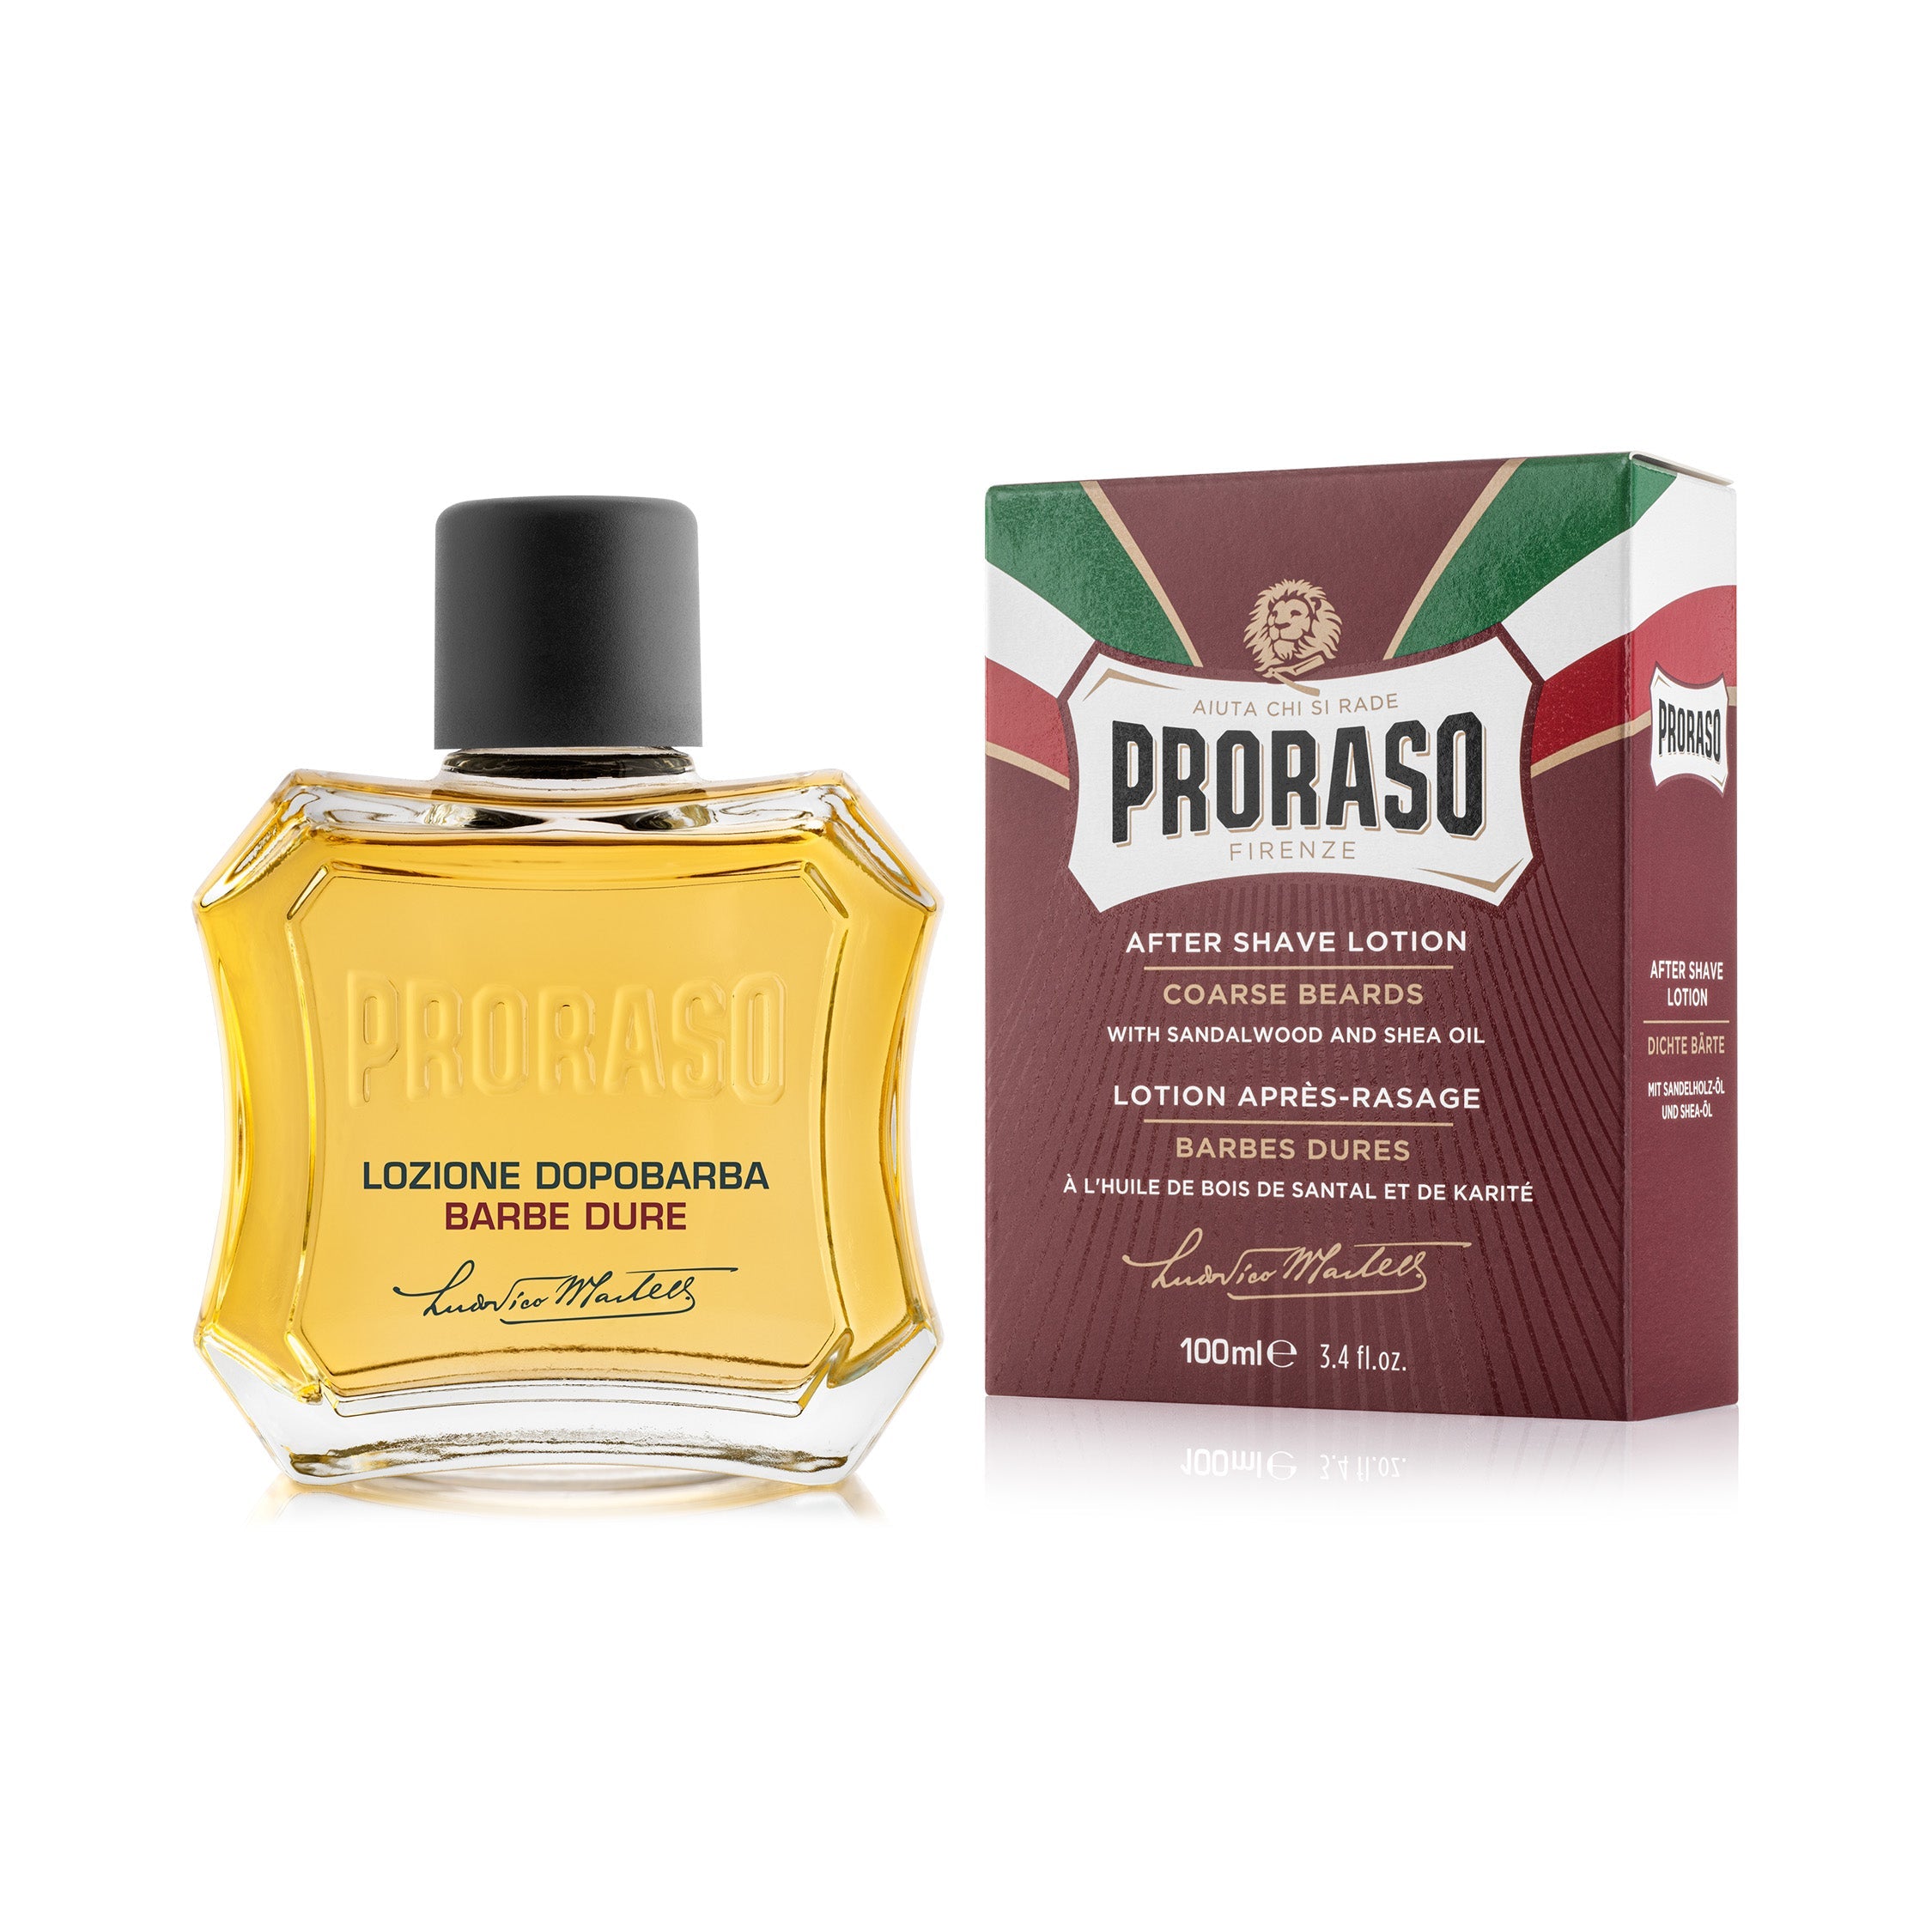 Proraso After Shave Lotion Coarse Beards with Sandalwood and Shea Oil